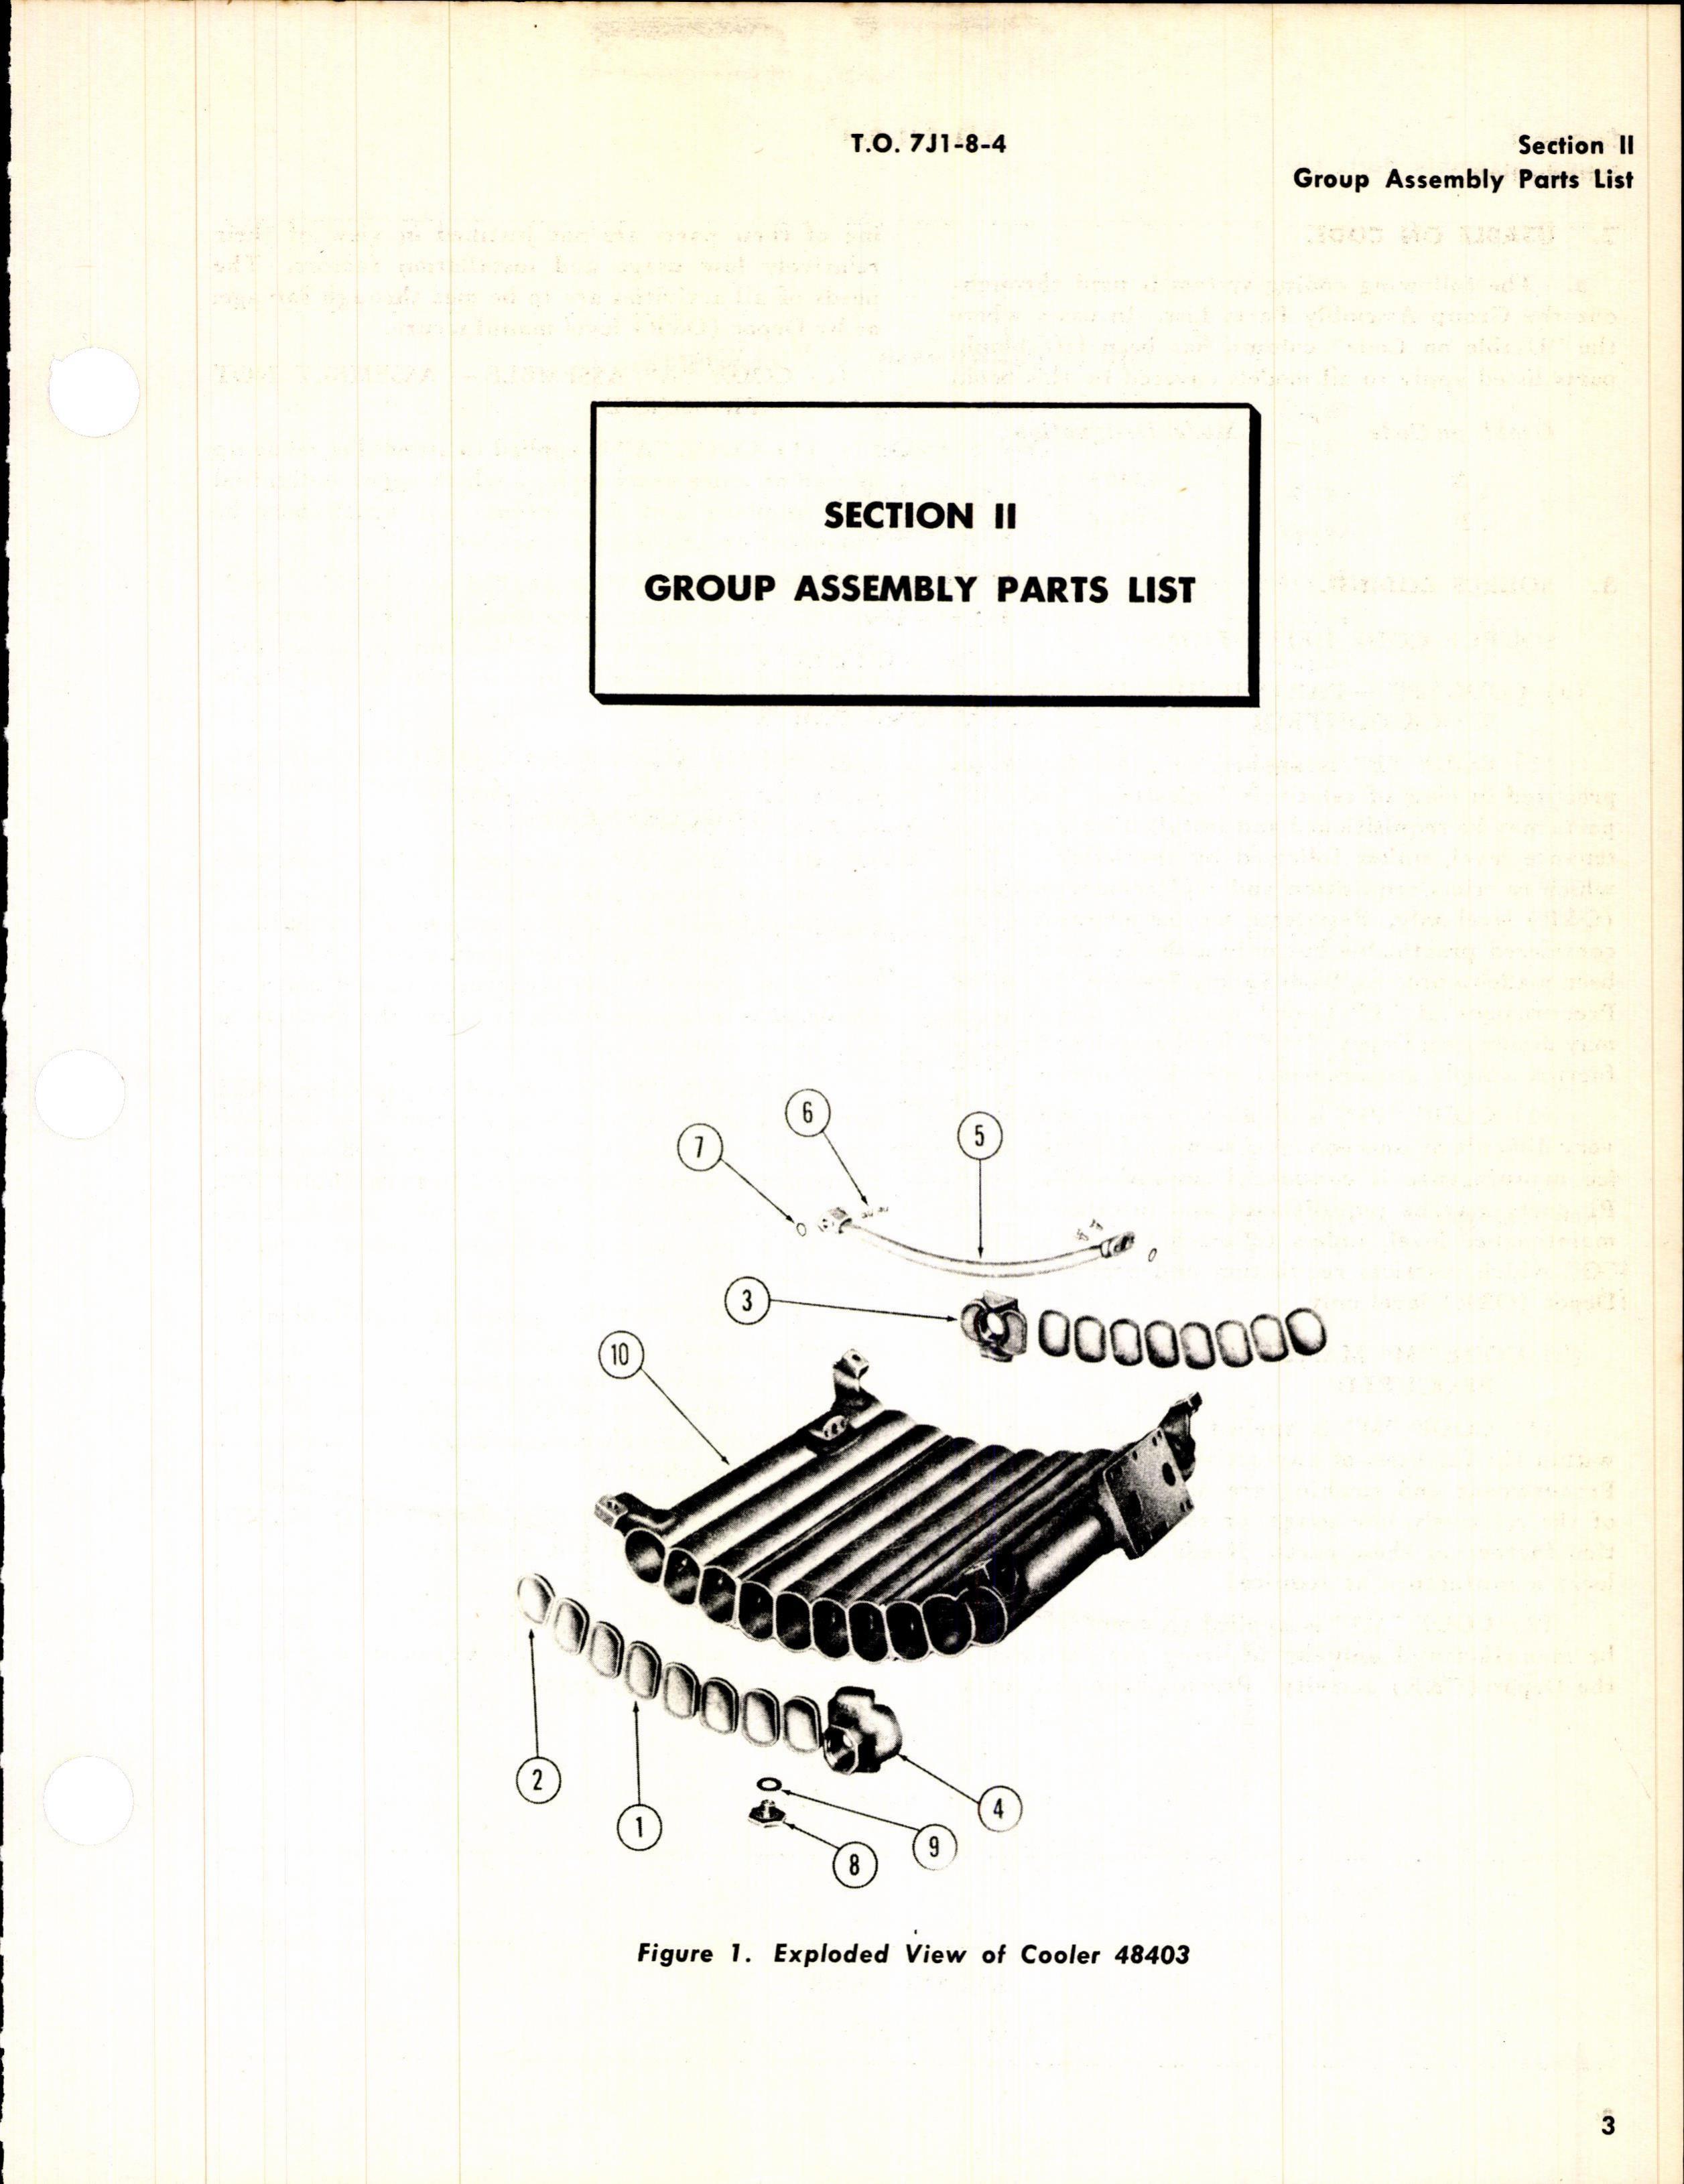 Sample page 5 from AirCorps Library document: Illustrated Parts Breakdown for Oil Coolers